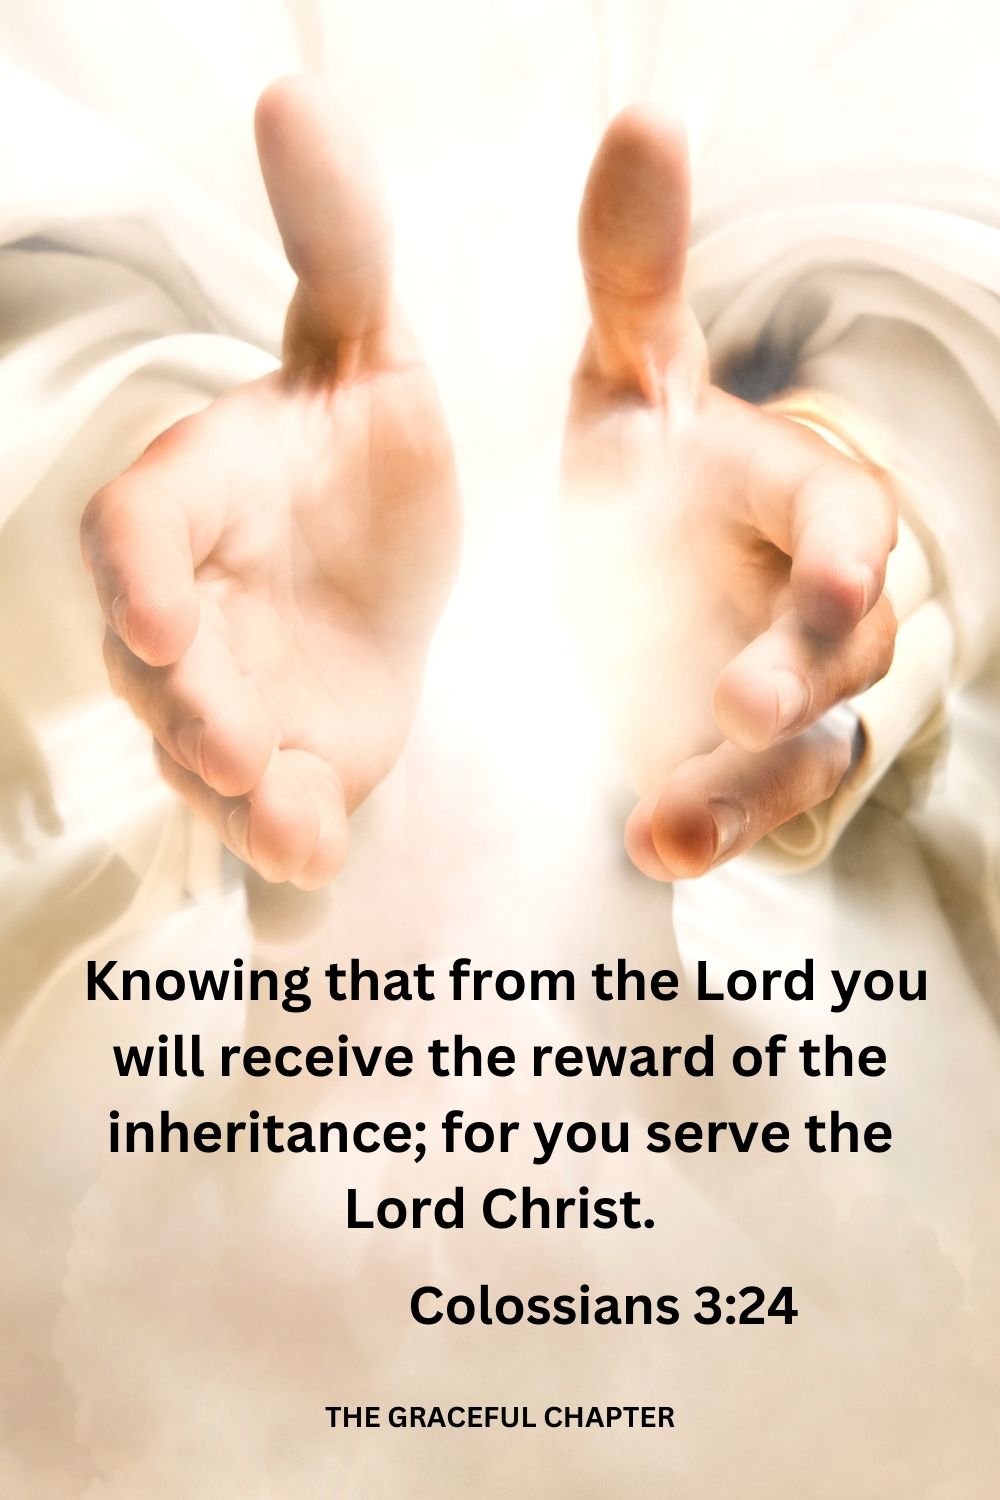  knowing that from the Lord you will receive the reward of the inheritance; for you serve the Lord Christ. Colossians 3:24